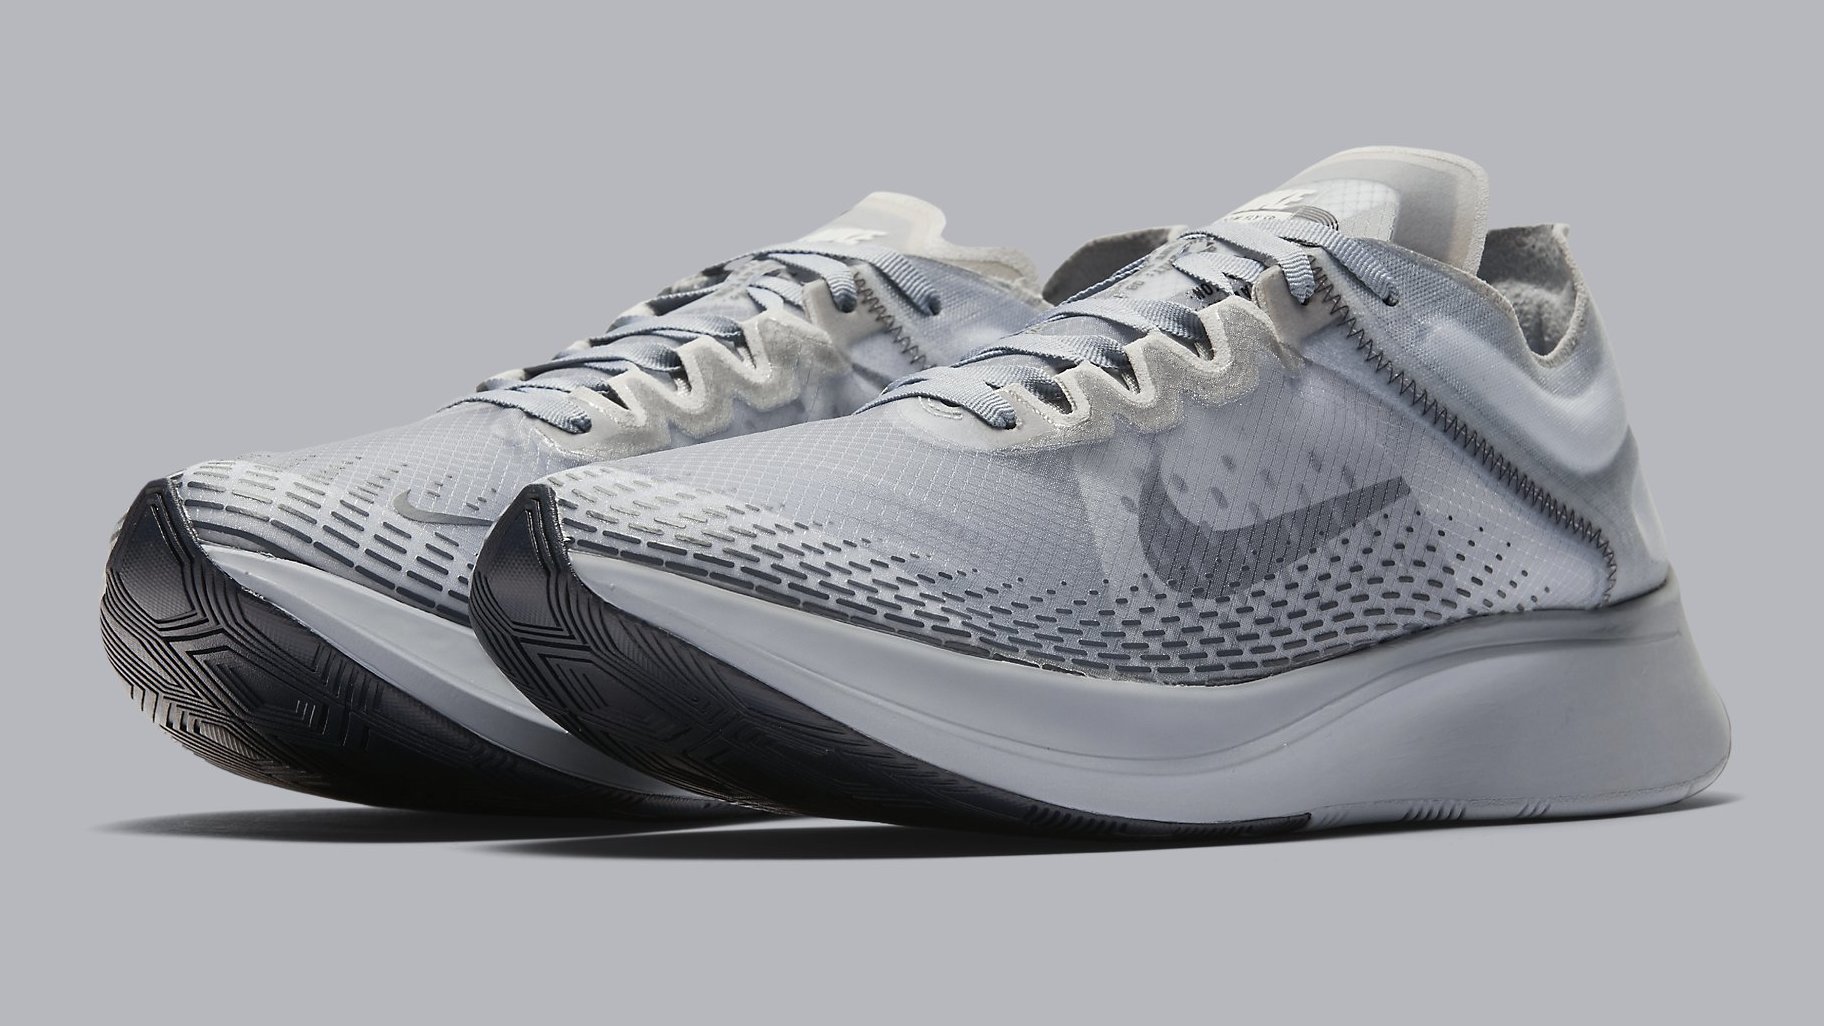 Nike Zoom Fly SP Fast Release Date Aug 